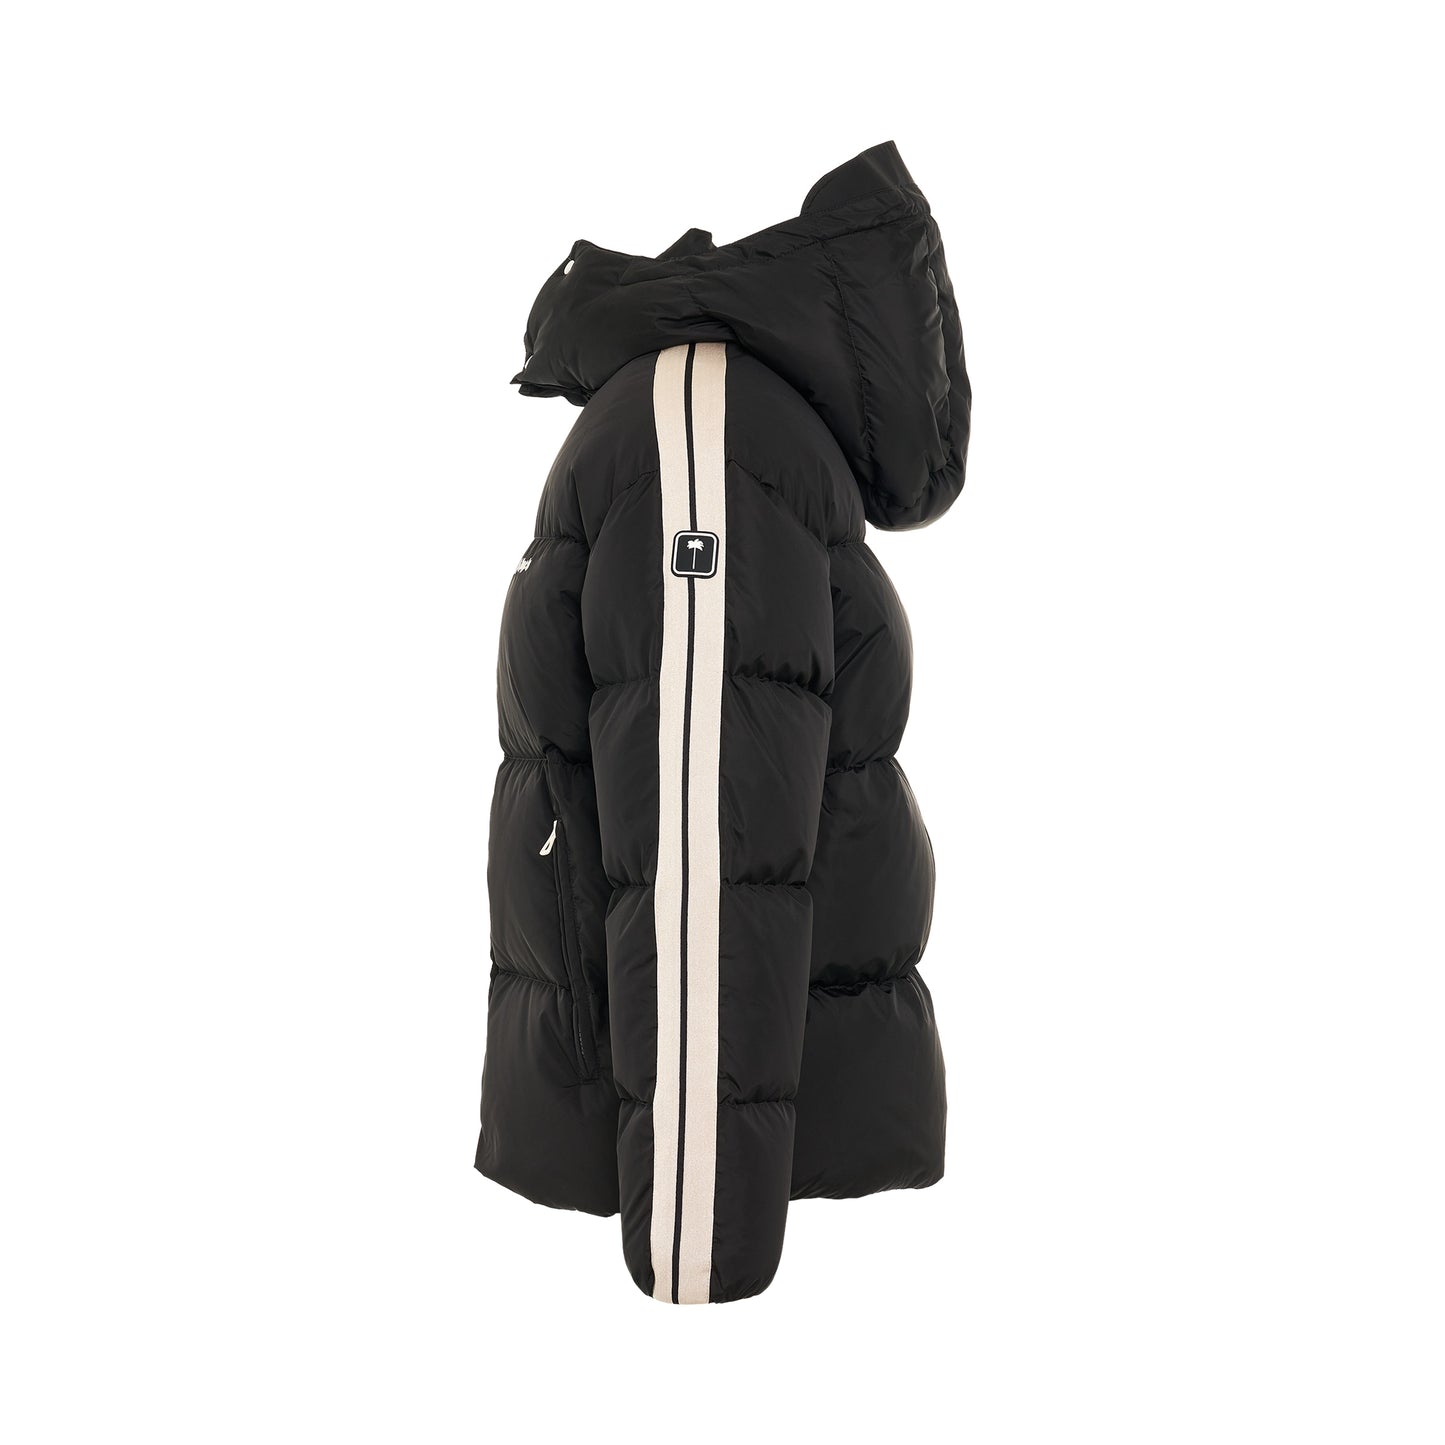 Hooded Track Down Jacket in Black/White